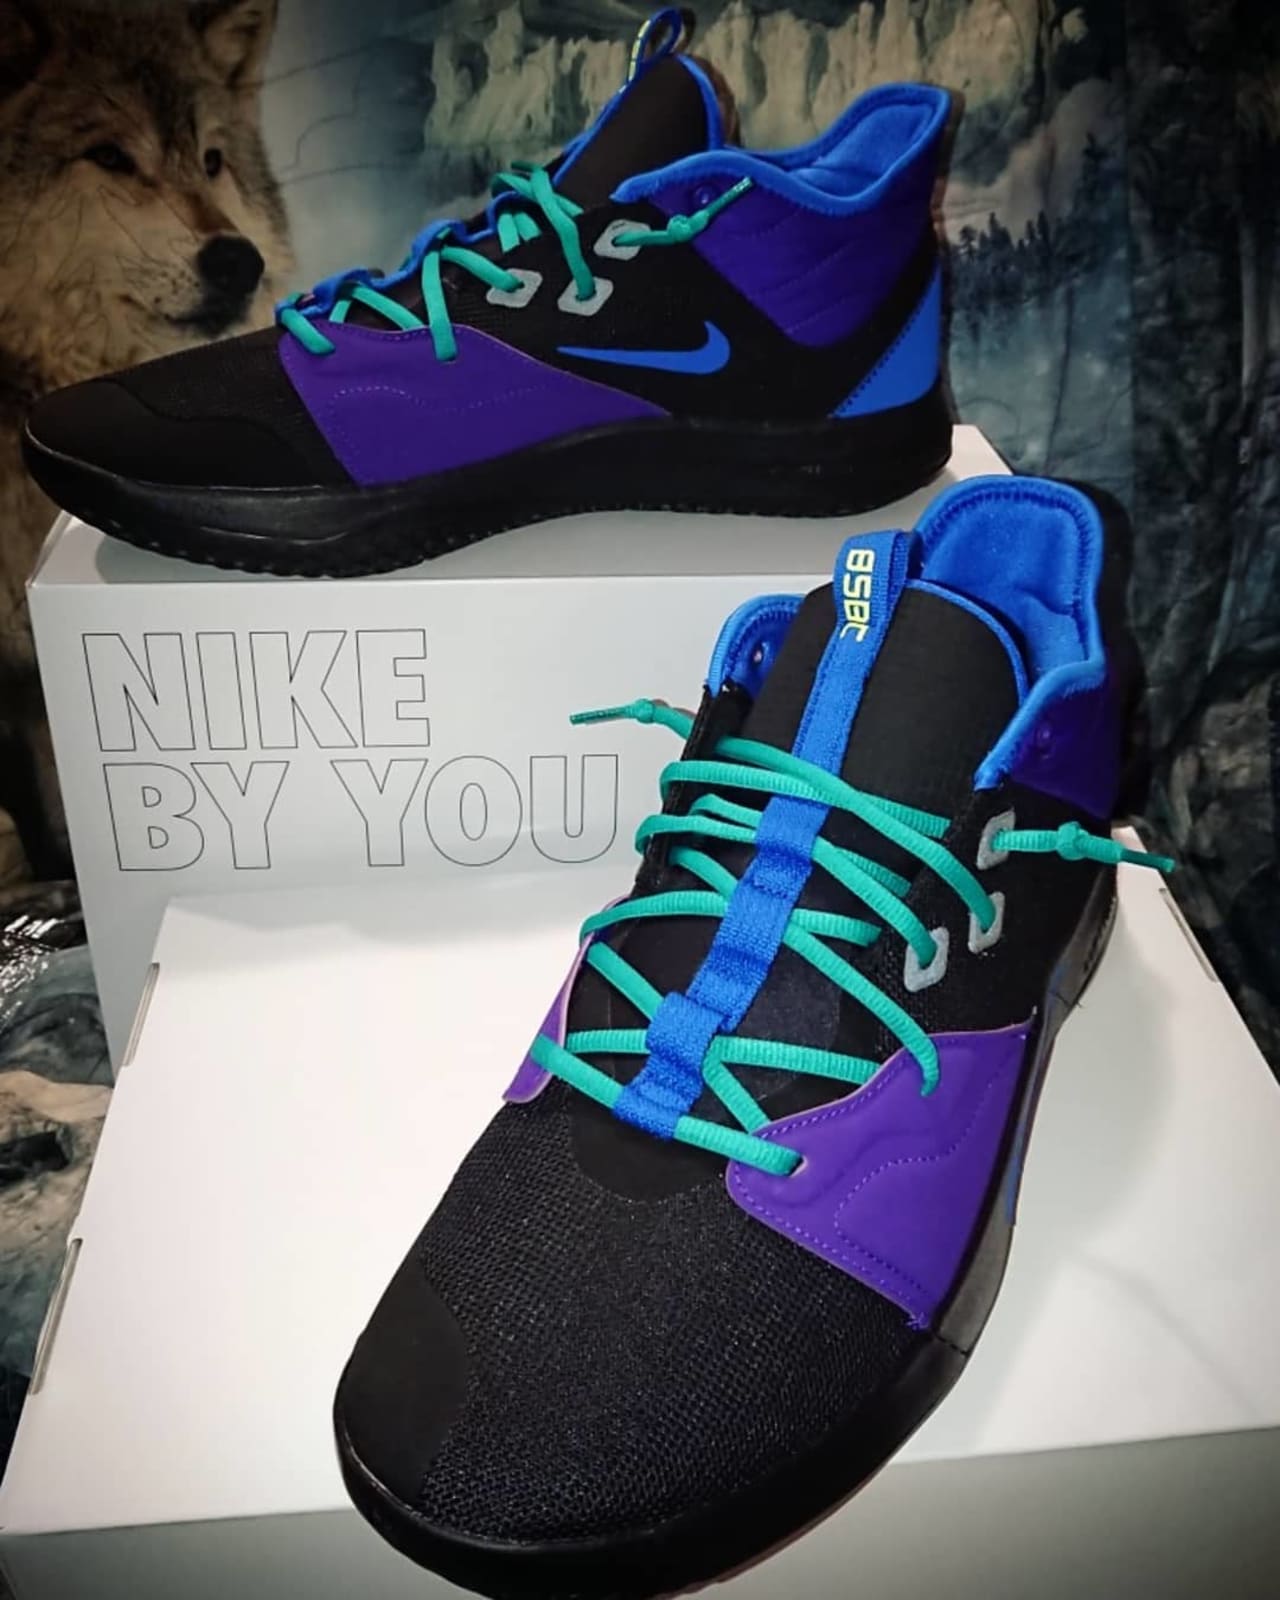 pg 3 nike by you